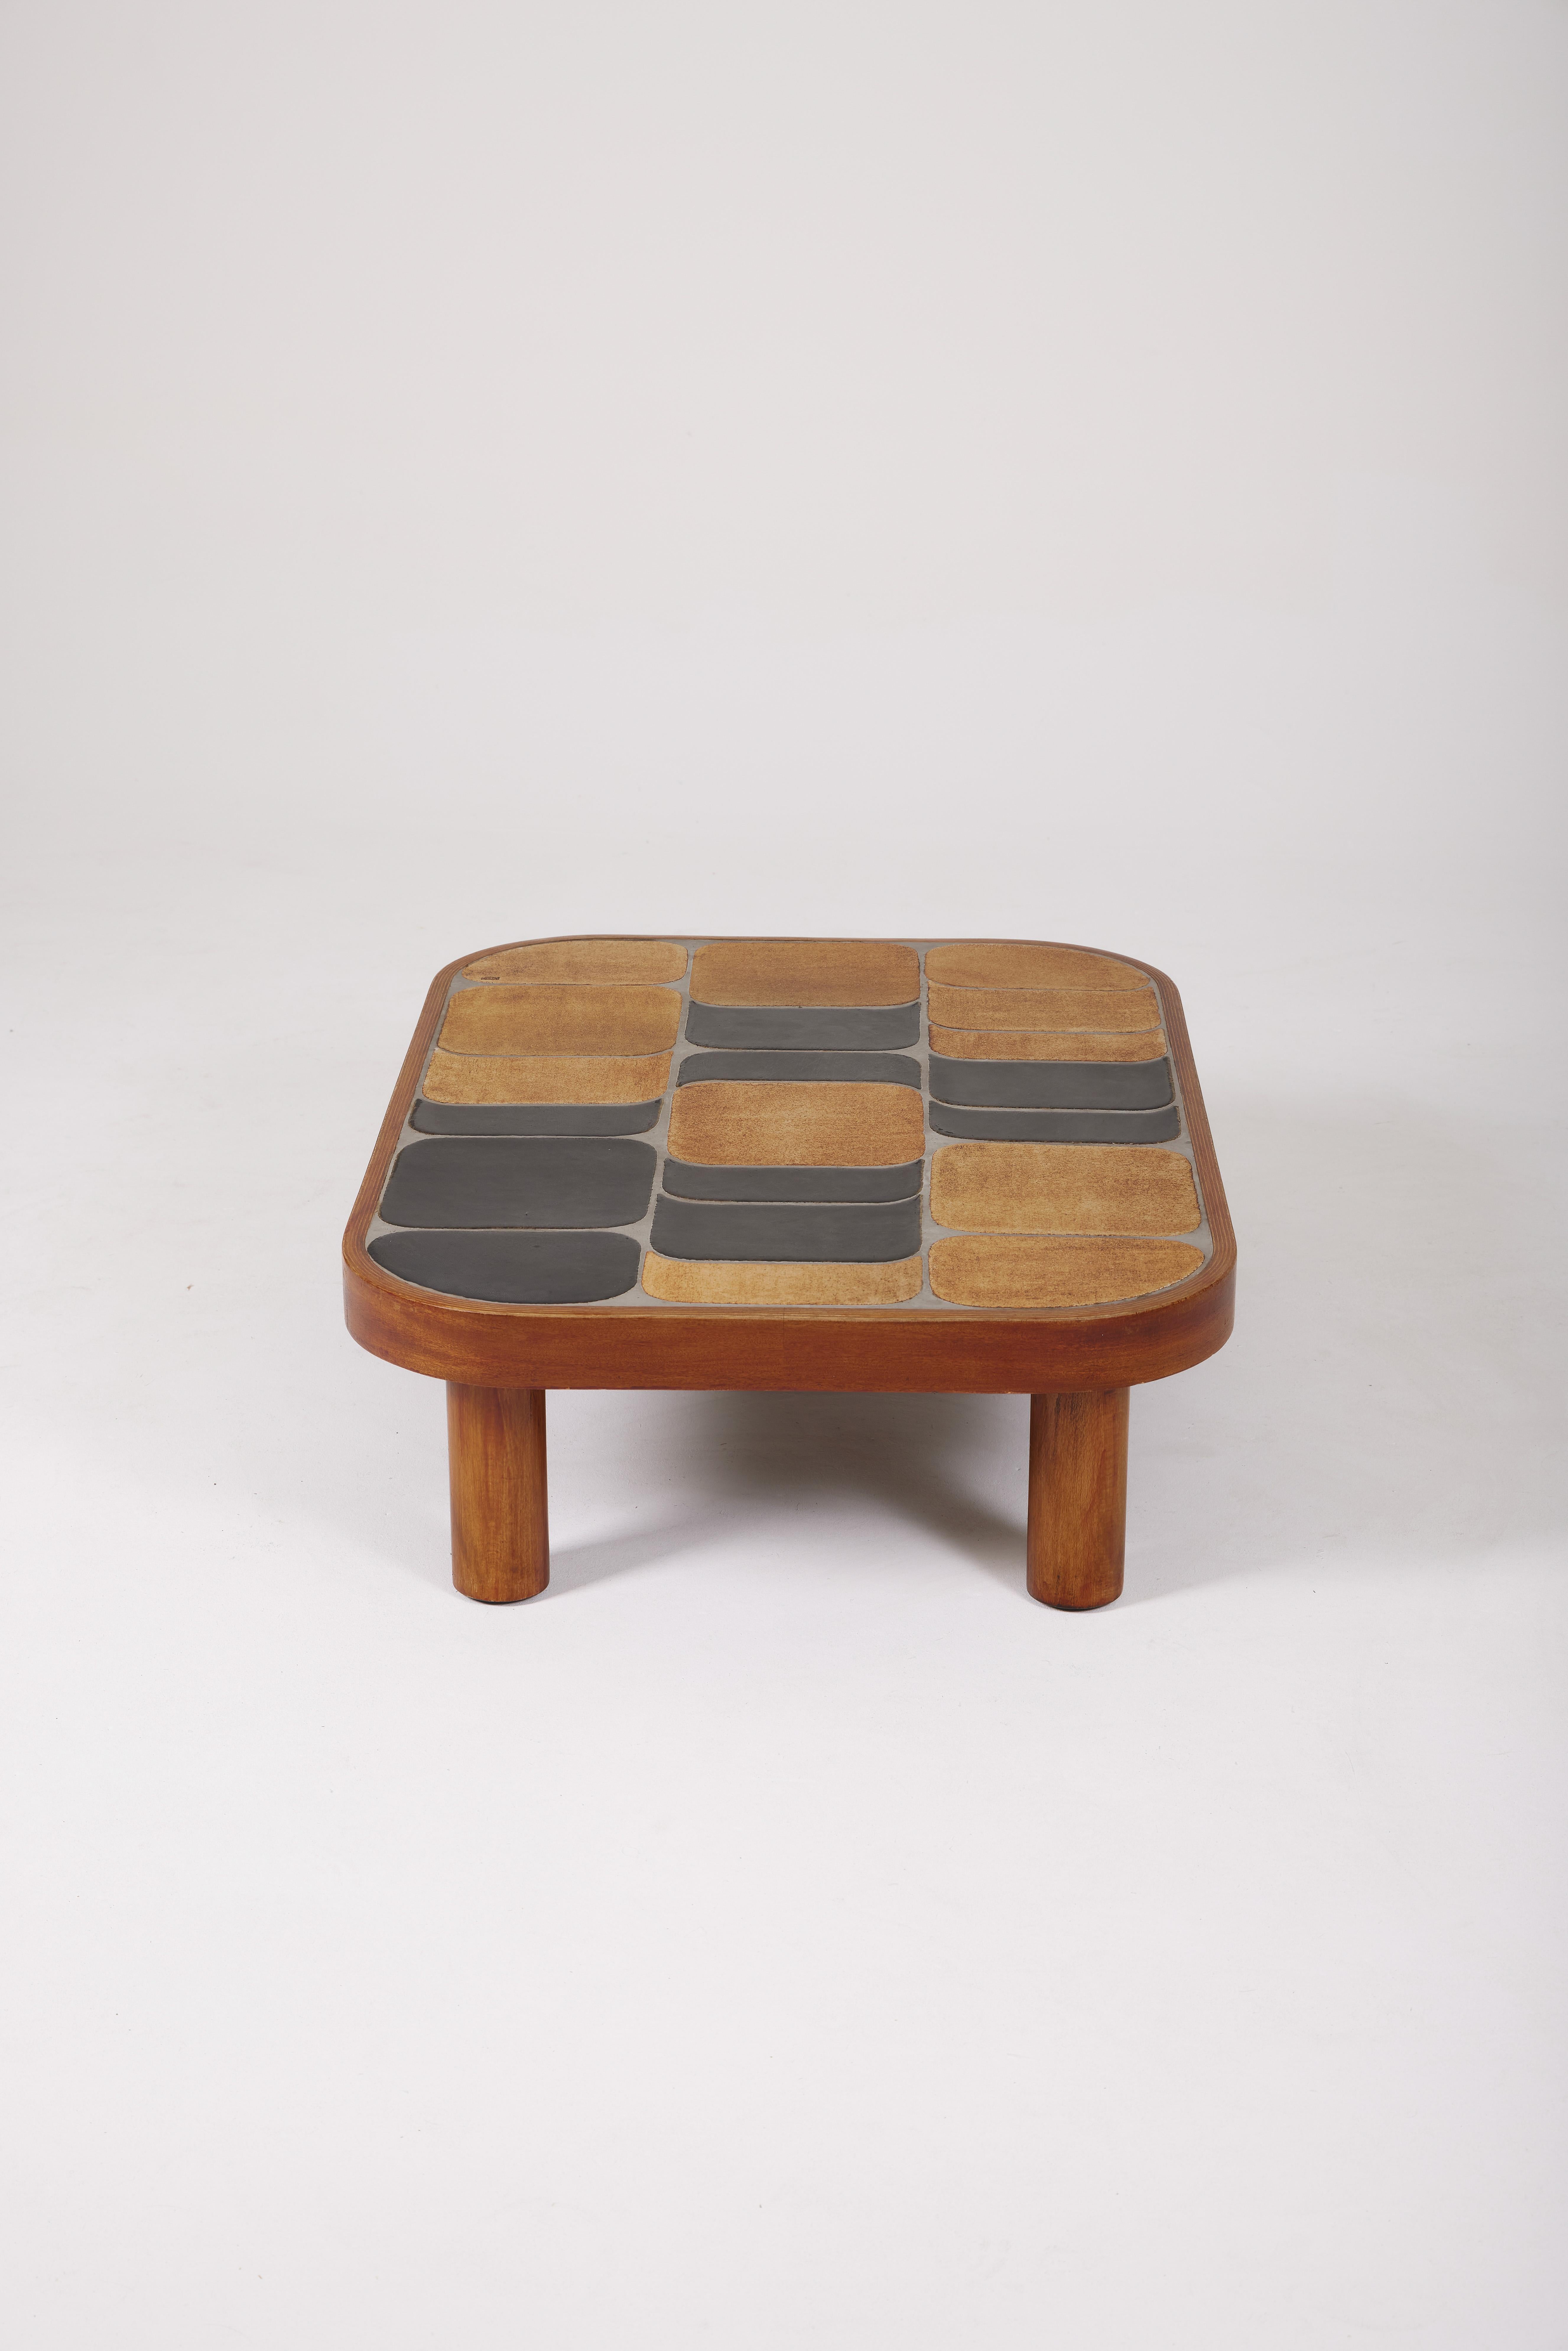 20th Century Shogun coffee table by Roger Capron, 1970s